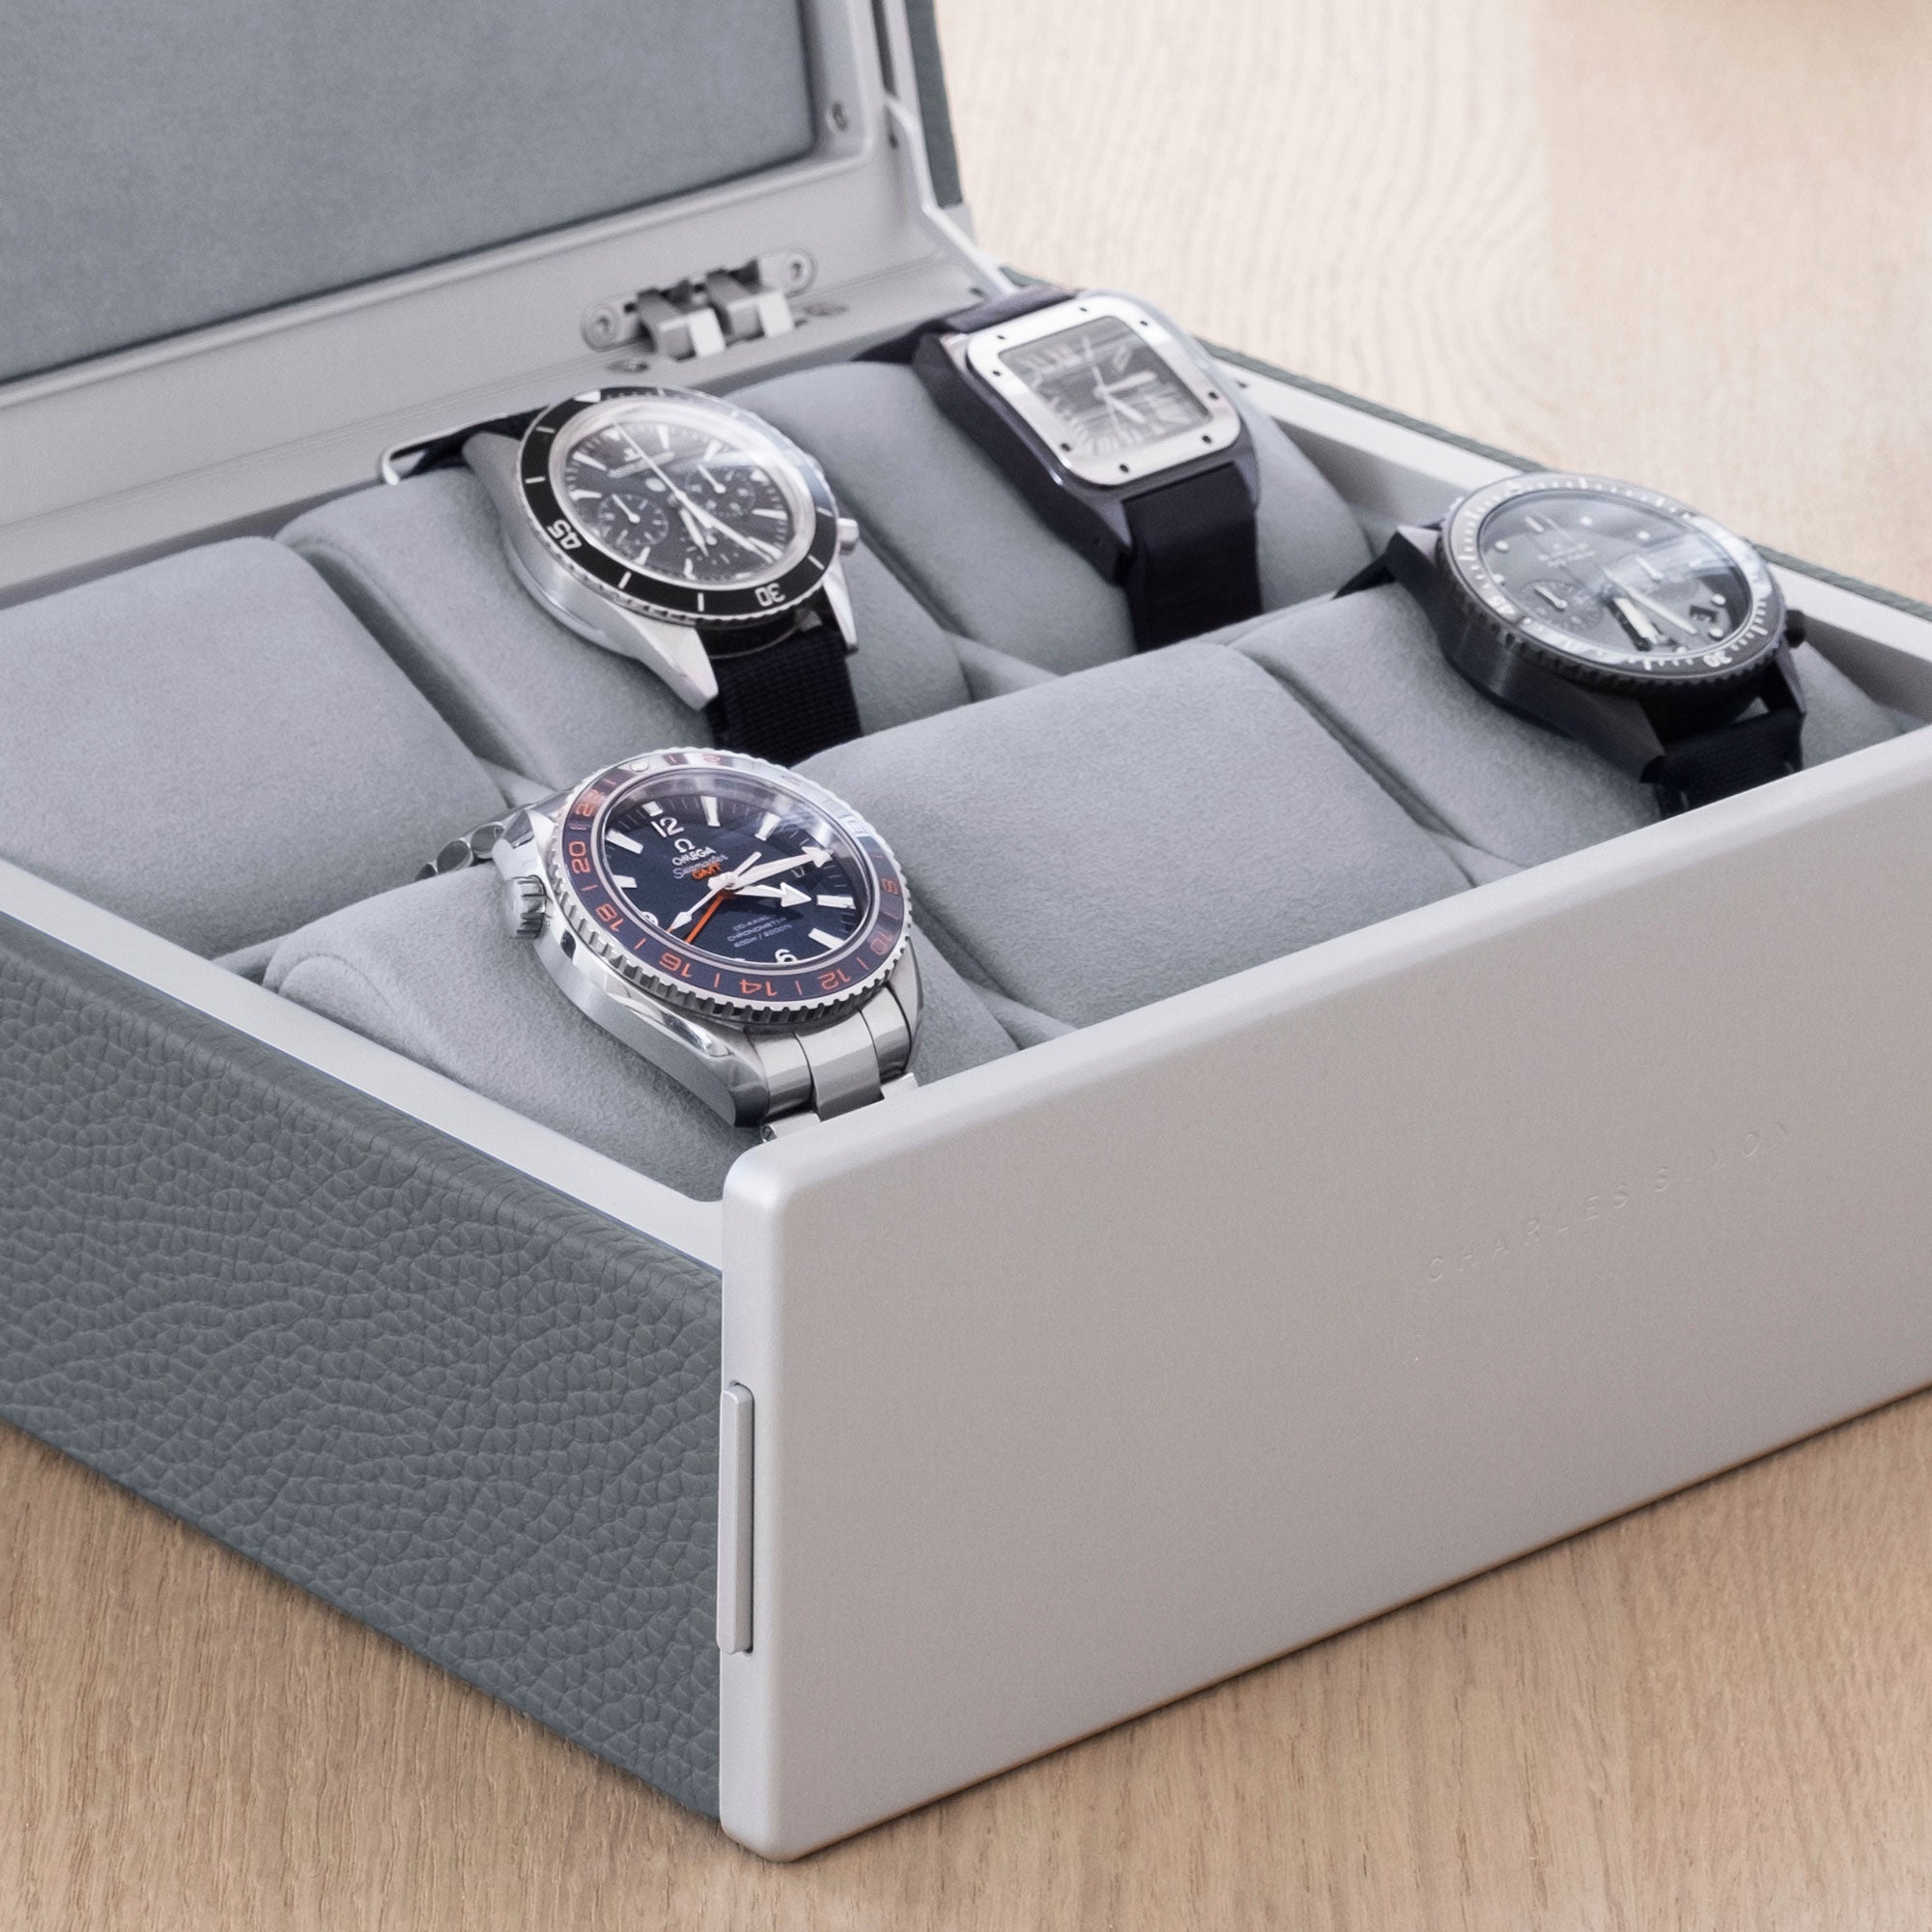 Lifestyle shot of Spence luxury watch box for 6 watches in cloud grey leather filled with men's watches including Blancpain, Omega and Jaeger Lecoultre placed on removable fog grey Alcantara cushions